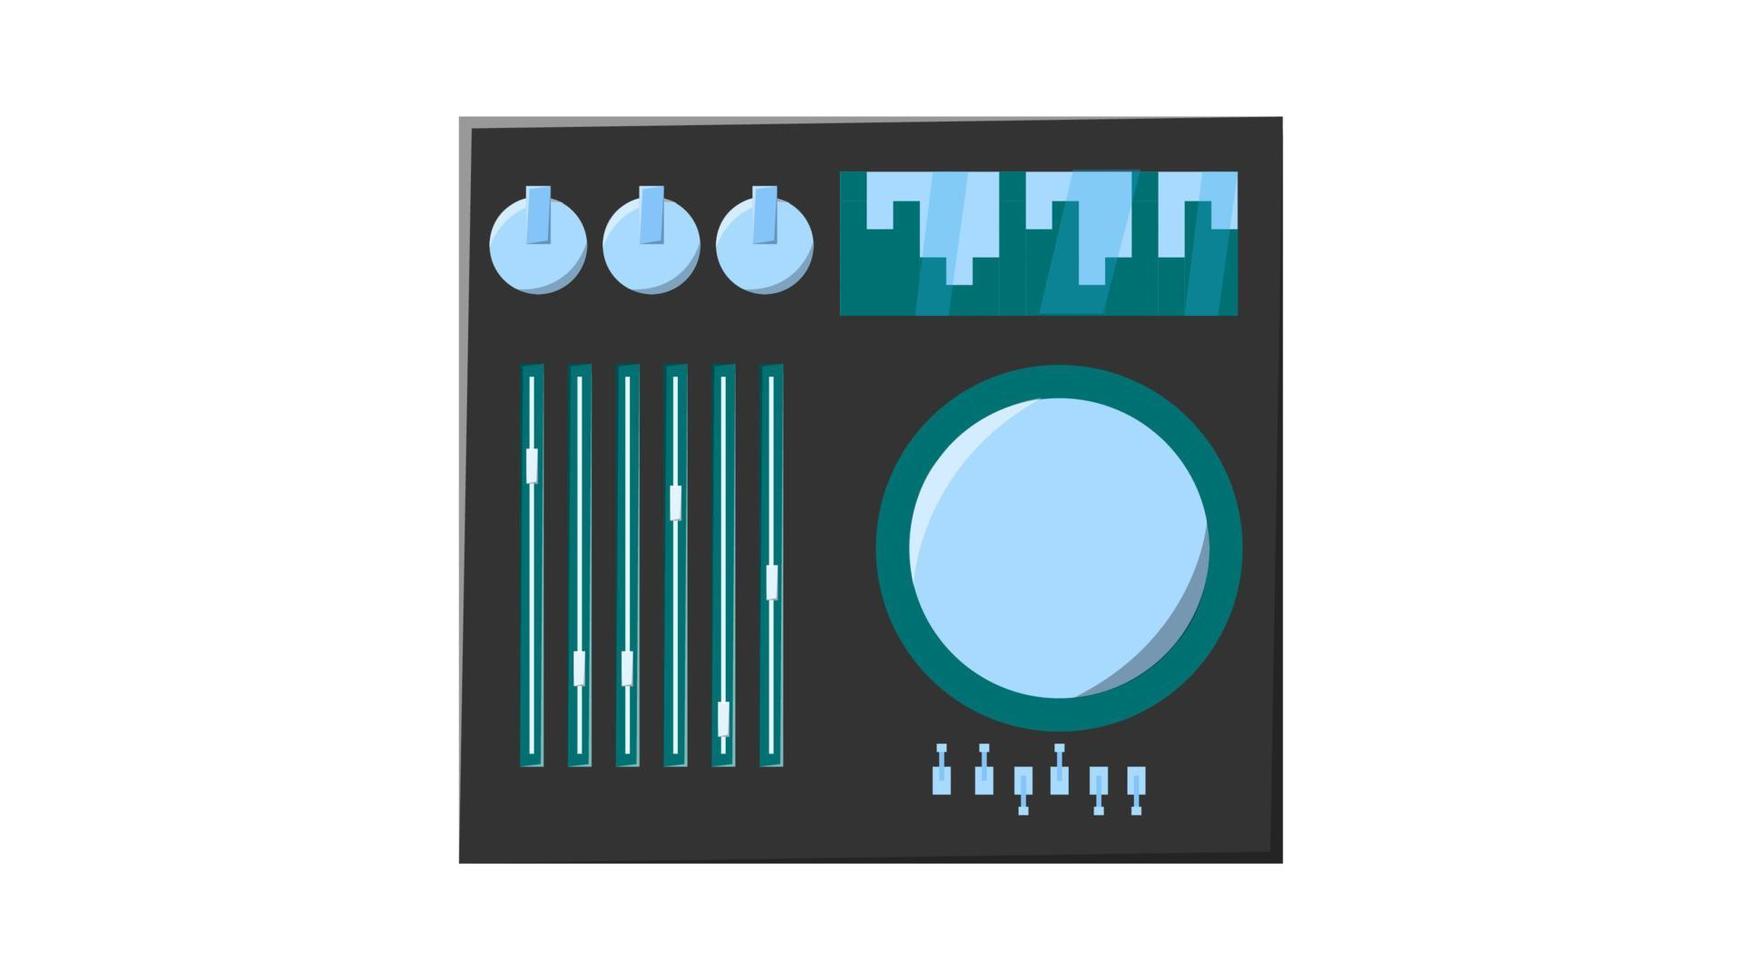 ld retro vintage green audio music equipment vinyl dj board with sliders and cranks and buttons from the 70s, 80s, 90s. Vector illustration